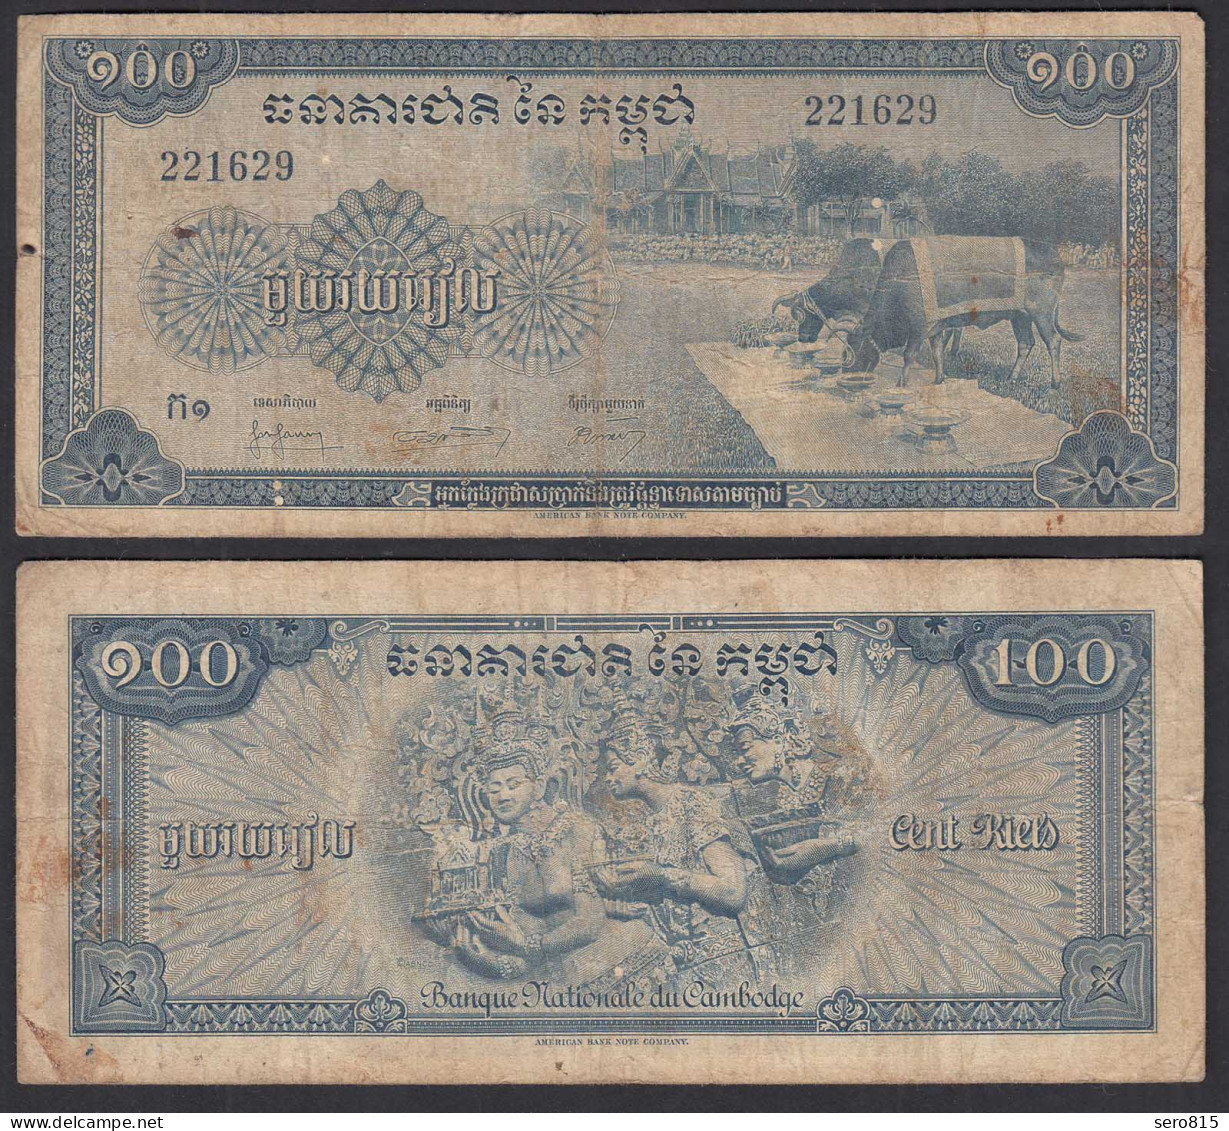 Kambodscha - Cambodia 100 Riels 1956 Pick 13a Sign.3 VG (5)    (31996 - Other - Asia